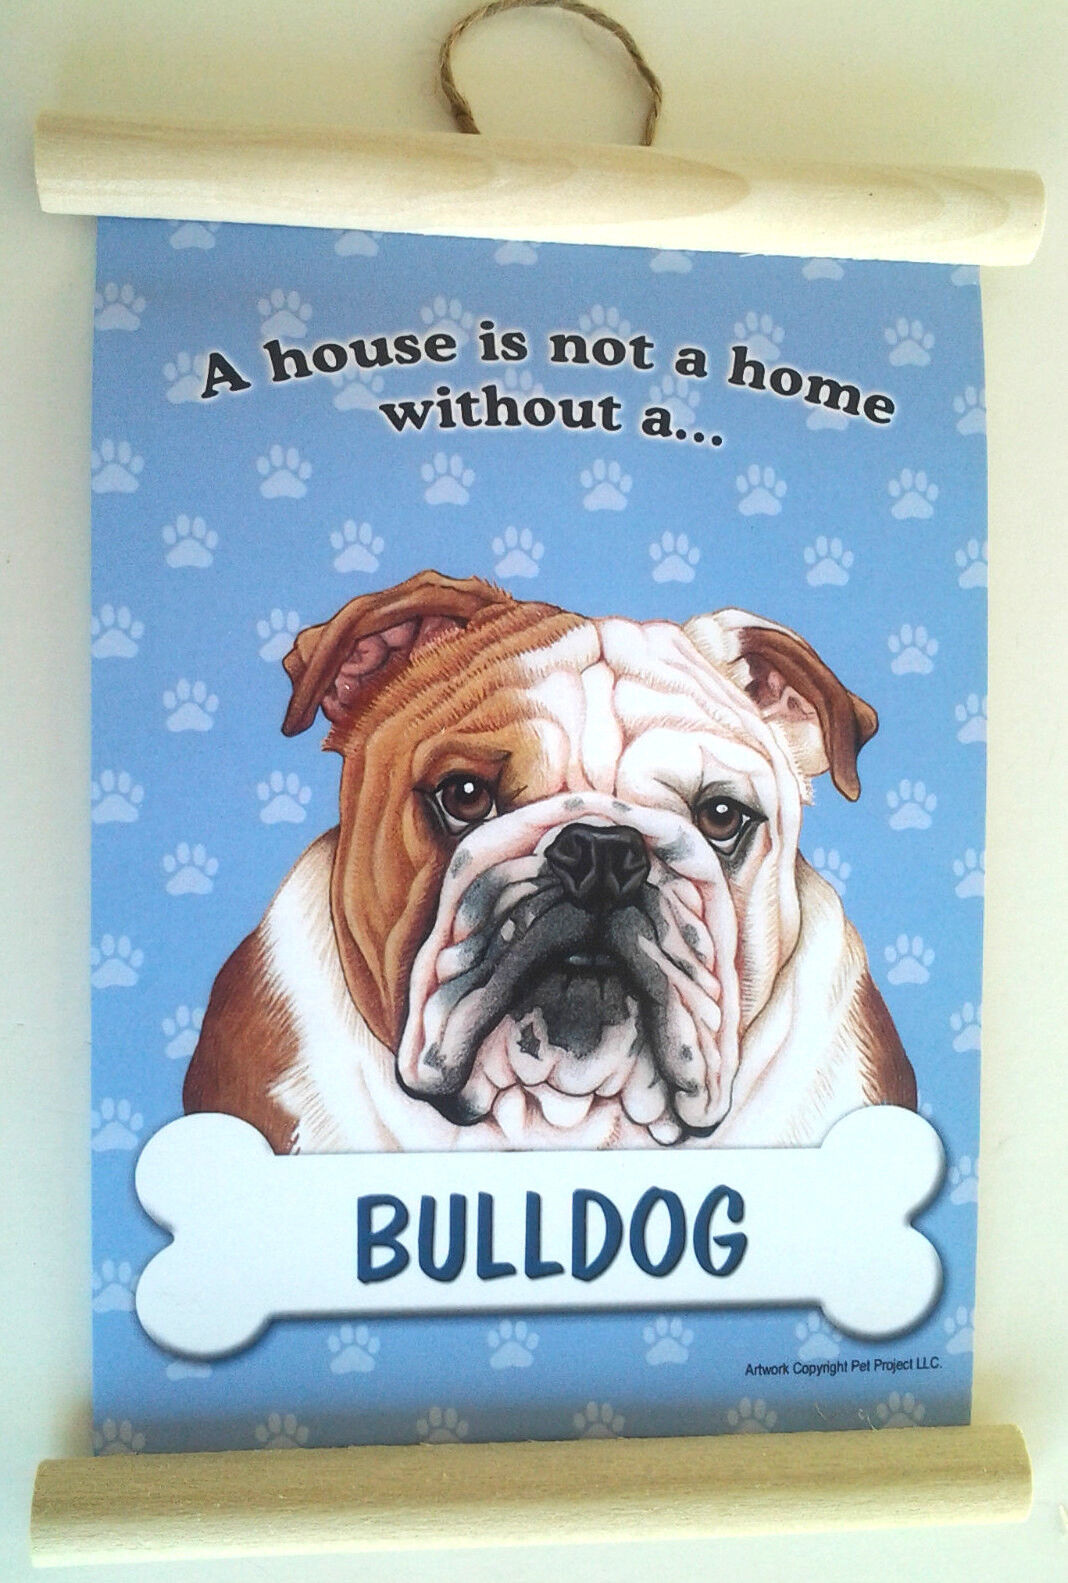 A HOUSE IS NOT HOME Recommended WITHOUT 2021 new NOVELTY WALL DOG BULLDOG HANGING